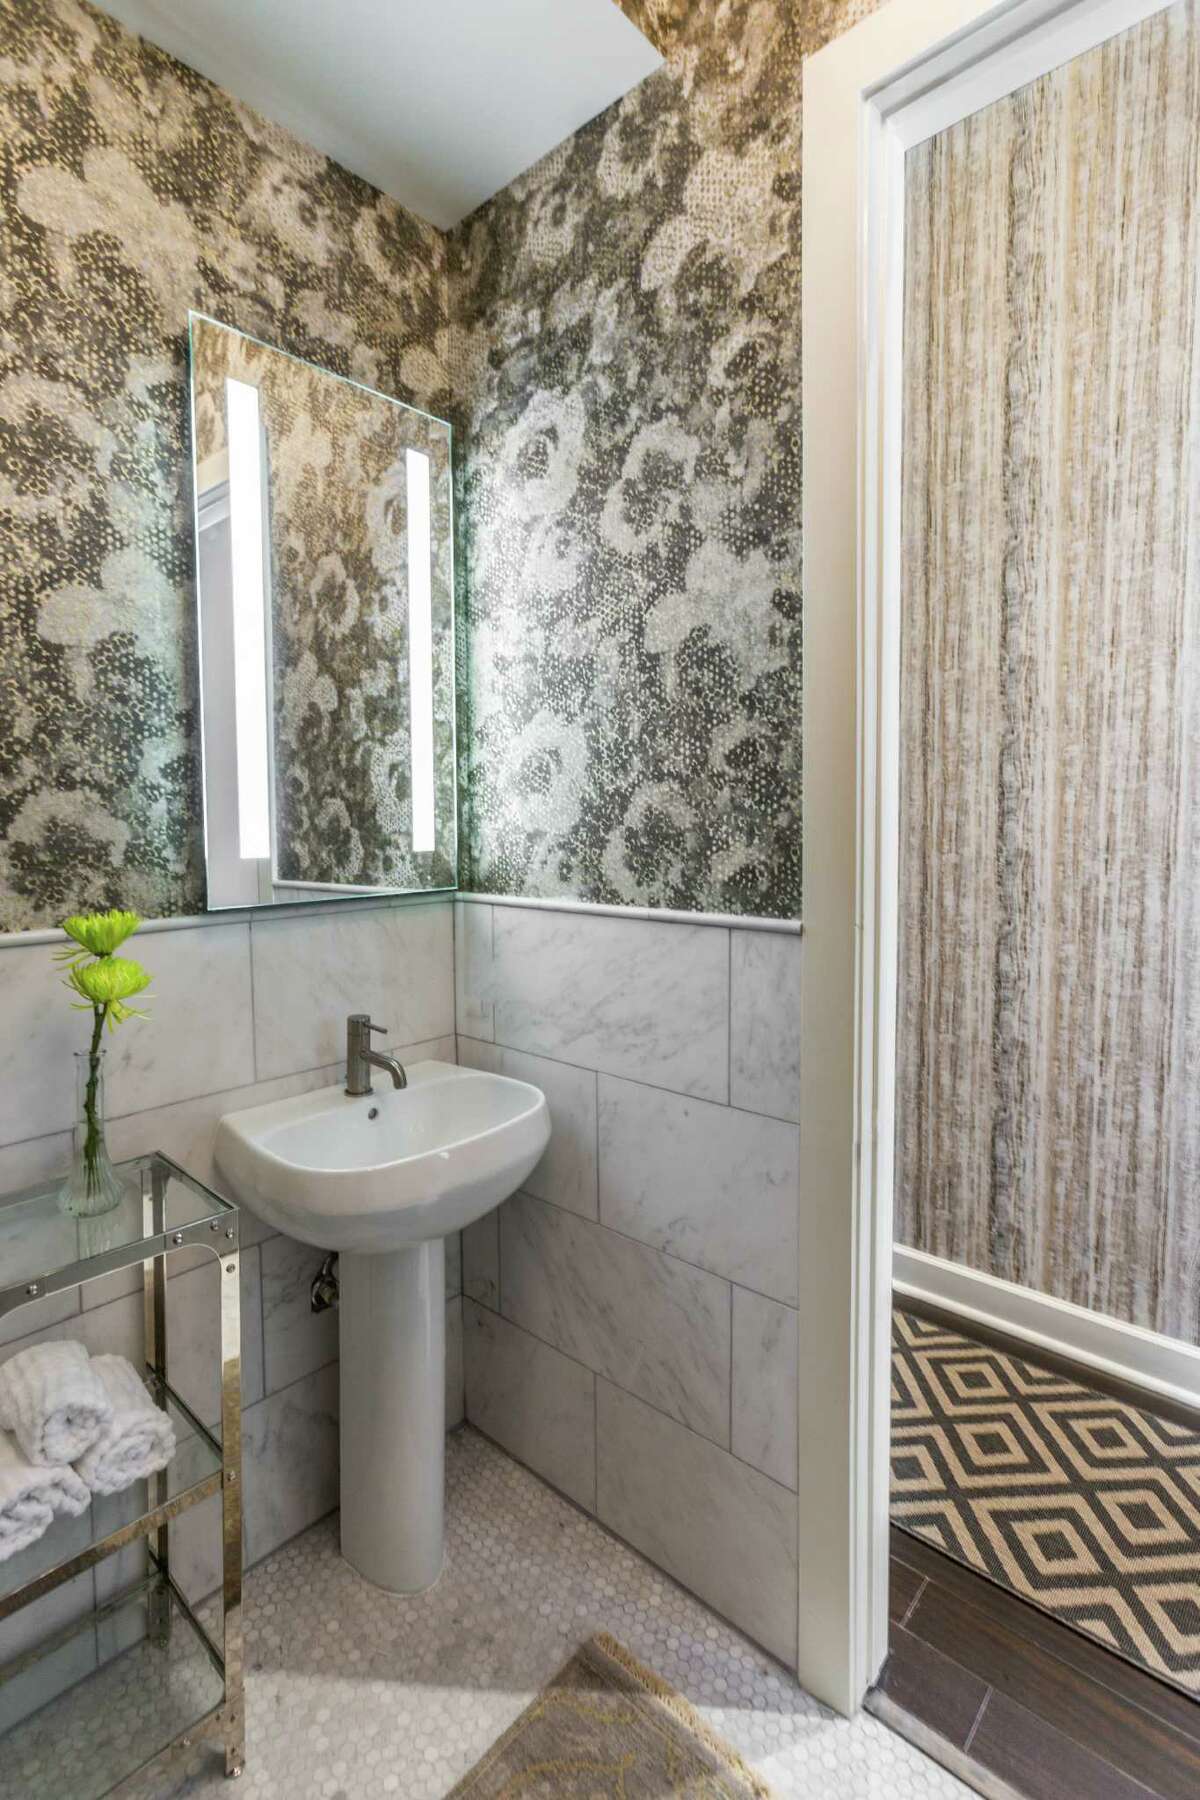 Designer Laura Umansky used a metallic floral-print wallpaper for this powder room in a Heights mid-rise. The metallic tones fit the industrial feel of the condo, but the floral print softens the look.